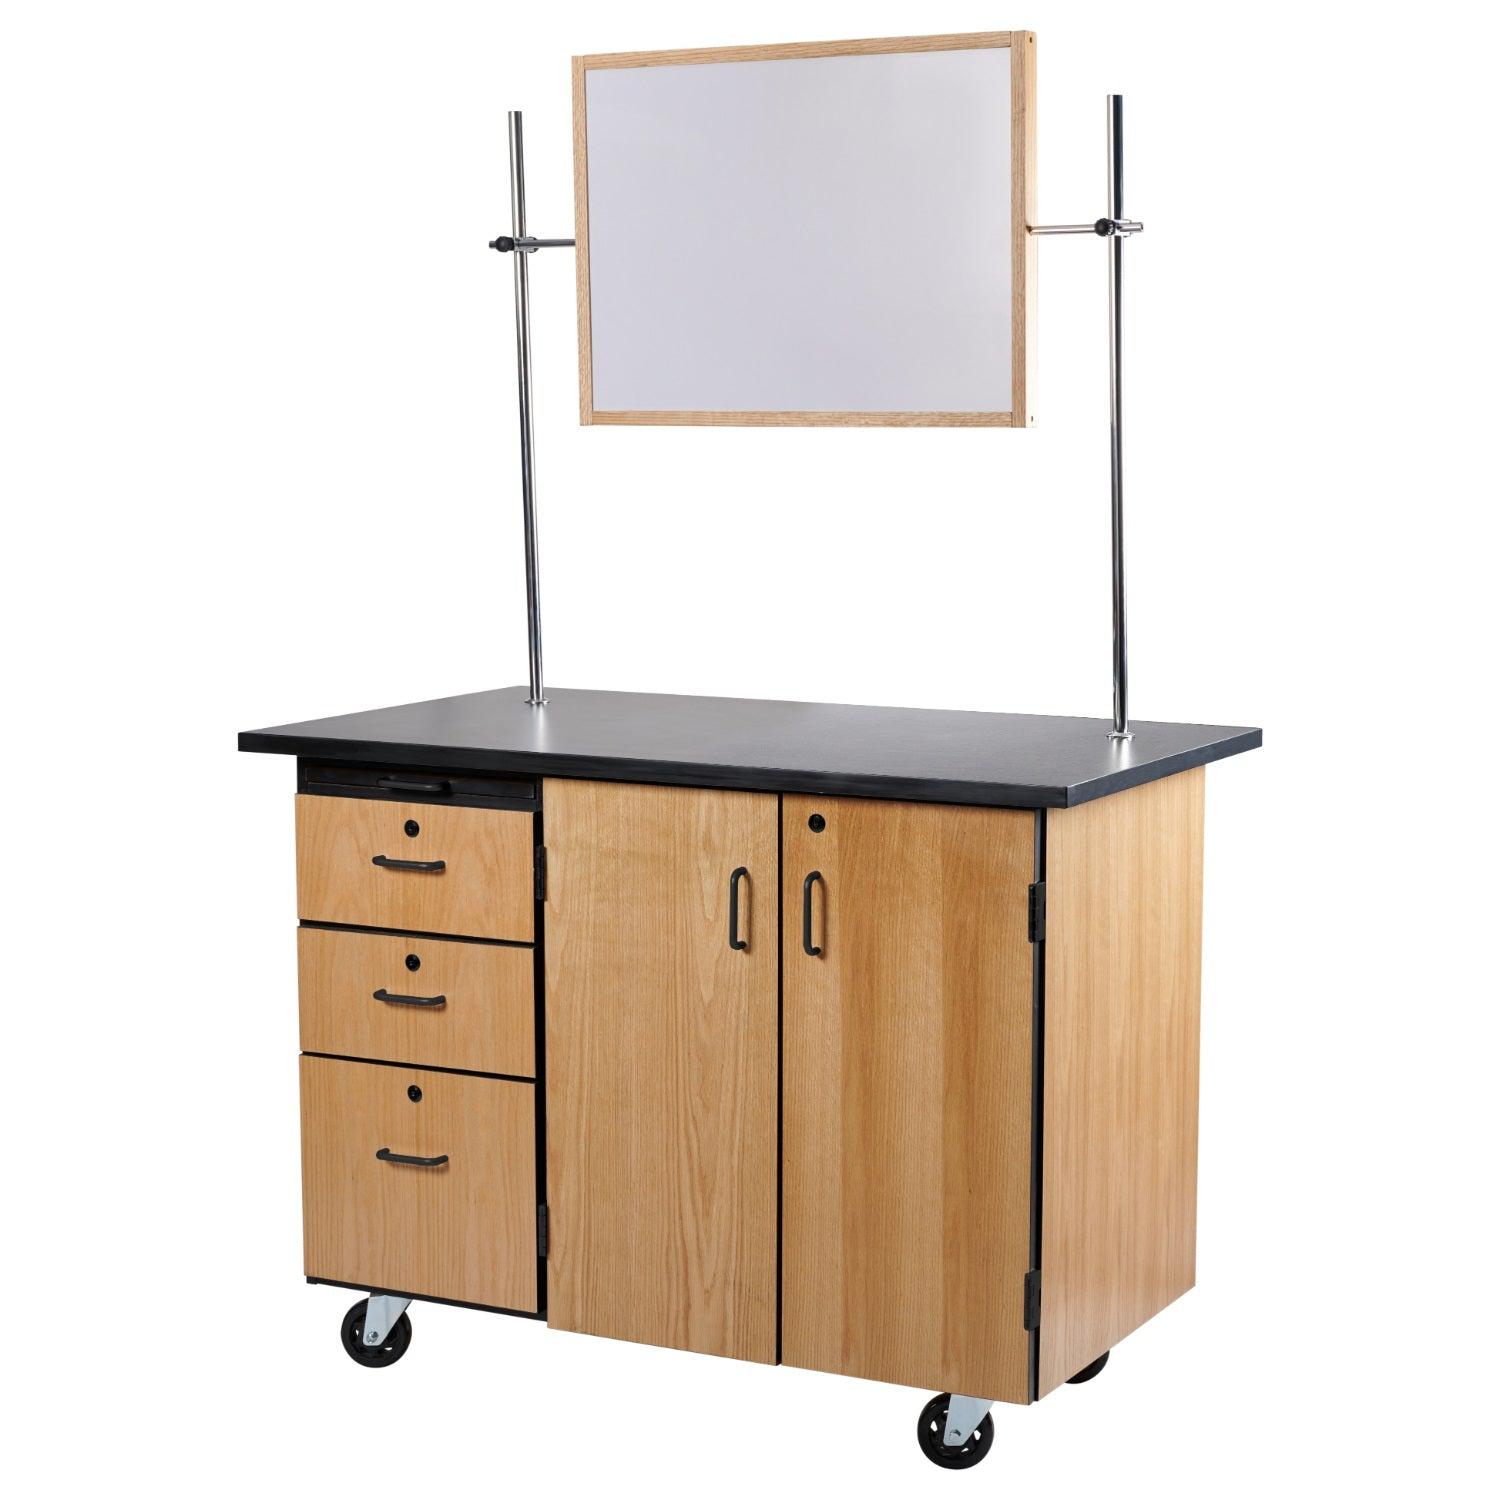 MSC Series Mobile Science Cart with External Drawers and Pegboard, Chem-Res Top and Whiteboard/Mirror